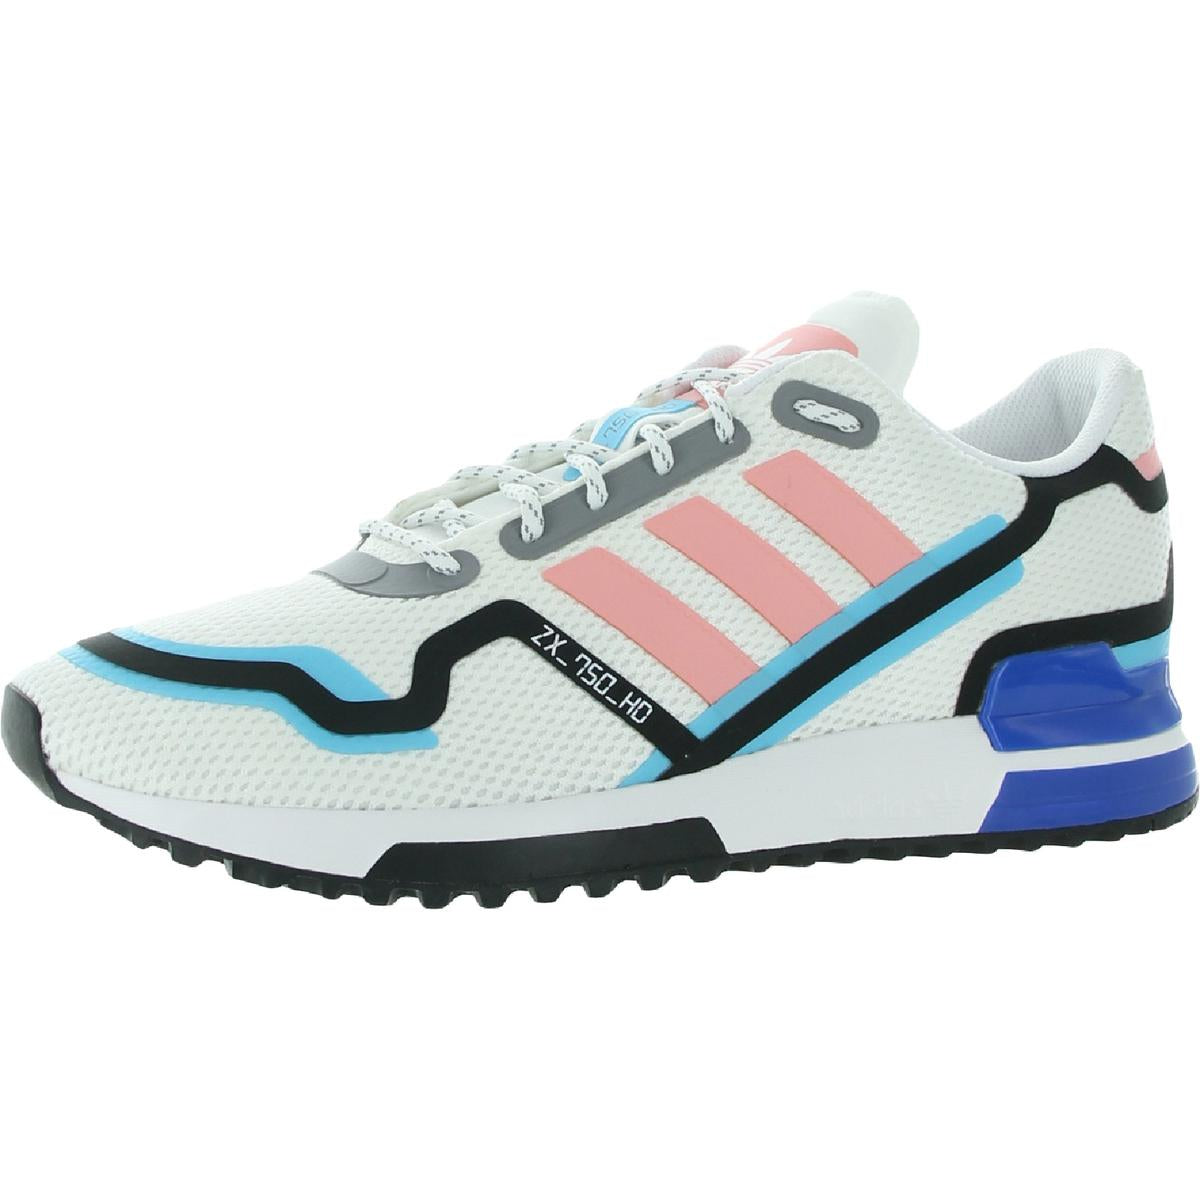 Zx 750 Hd Mens Running Fitness Athletic And Training Shoes